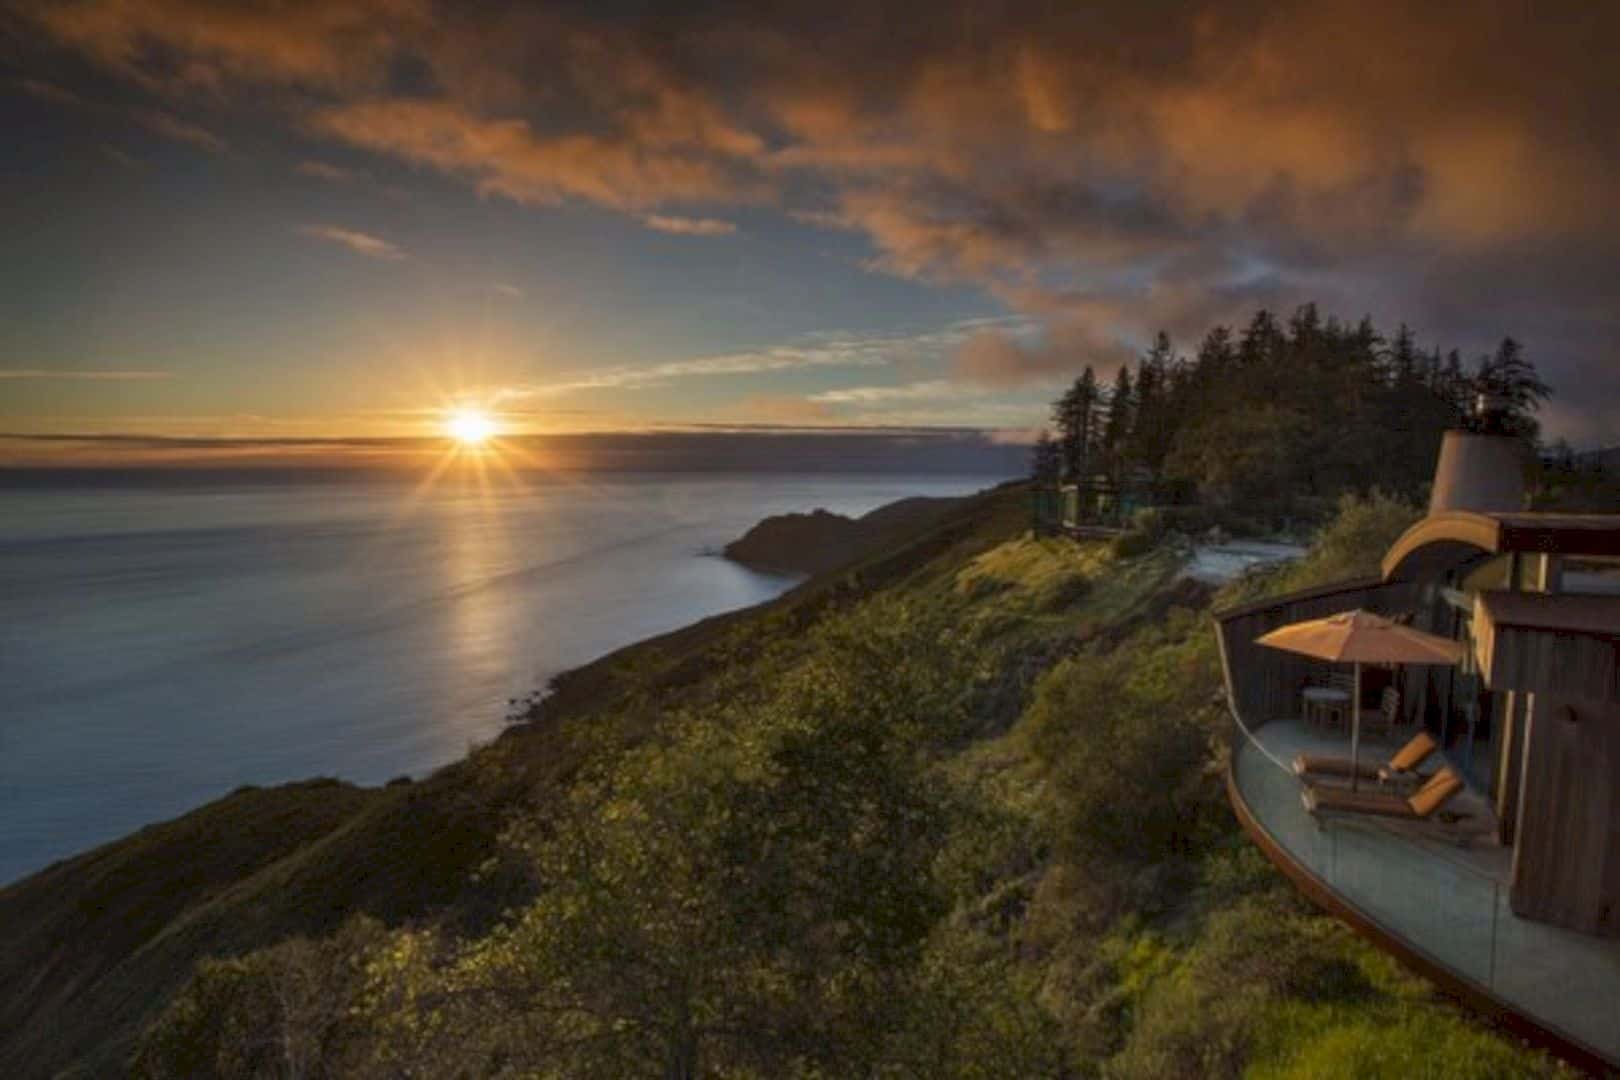 The Post Ranch Inn A Rustic Eco Luxury Hotel Overlooks The Pacific 6